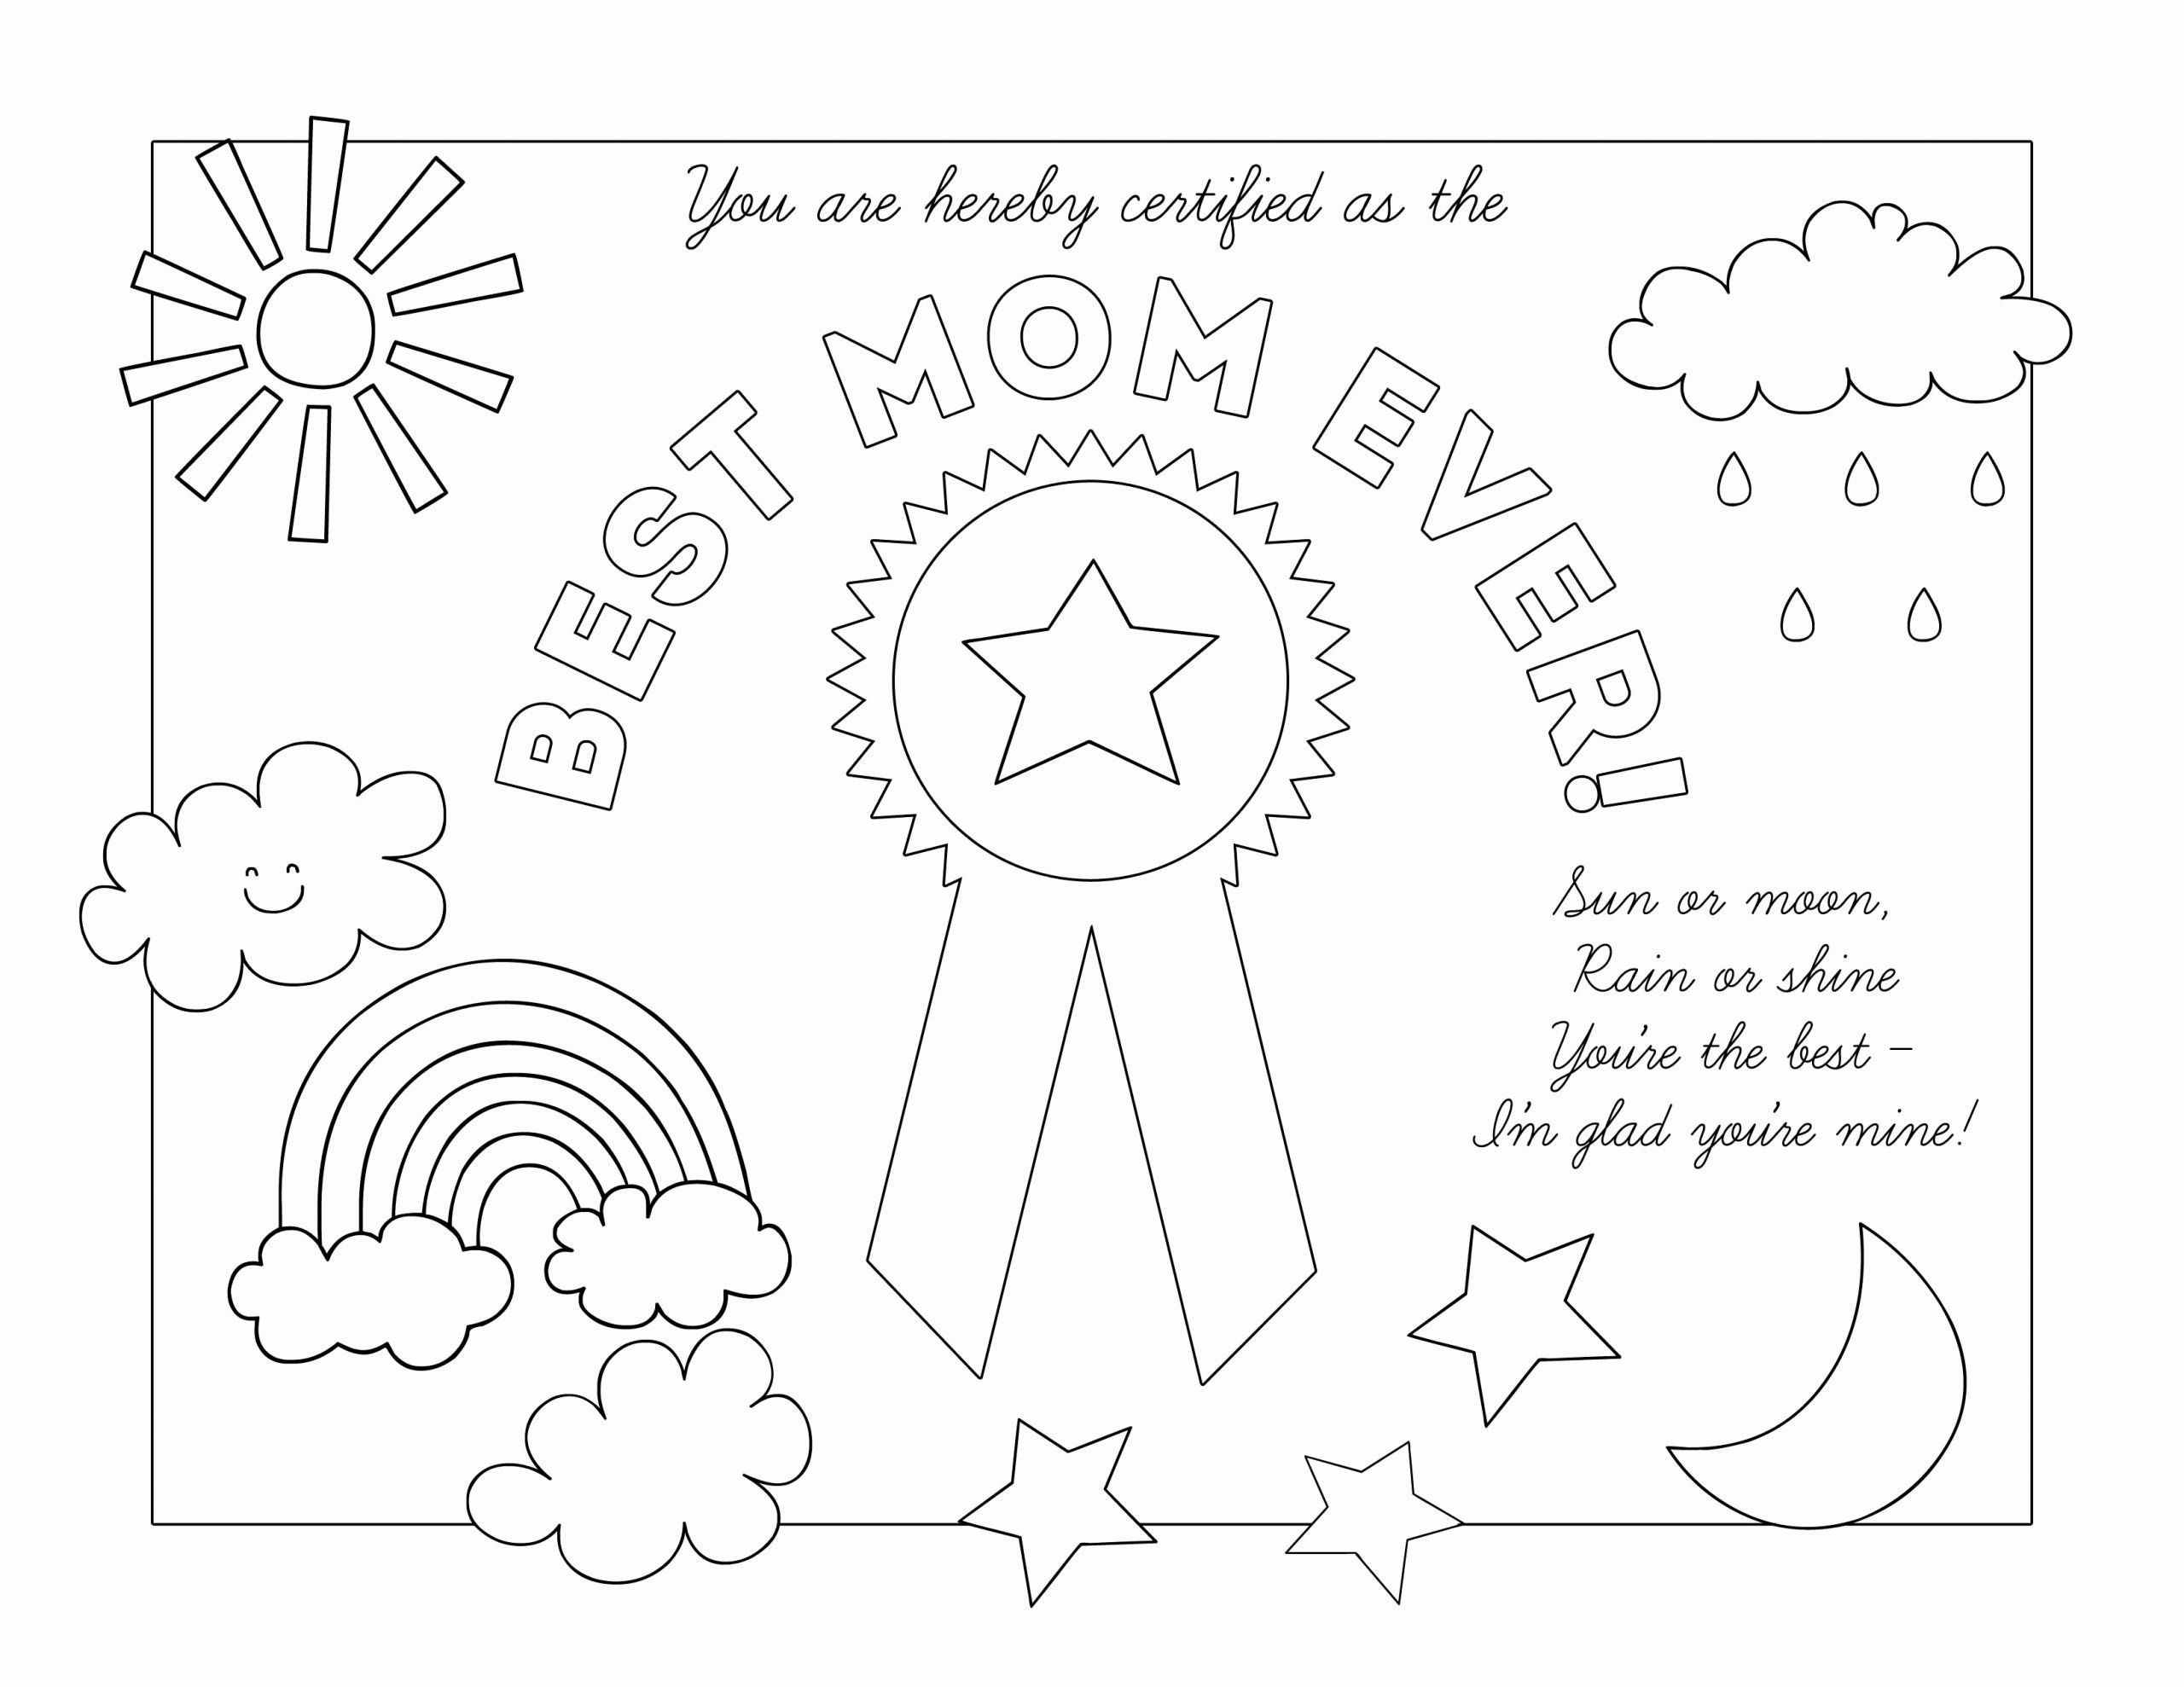 Best Mom Award Coloring Page (Page 1) - Line.17QQ.com